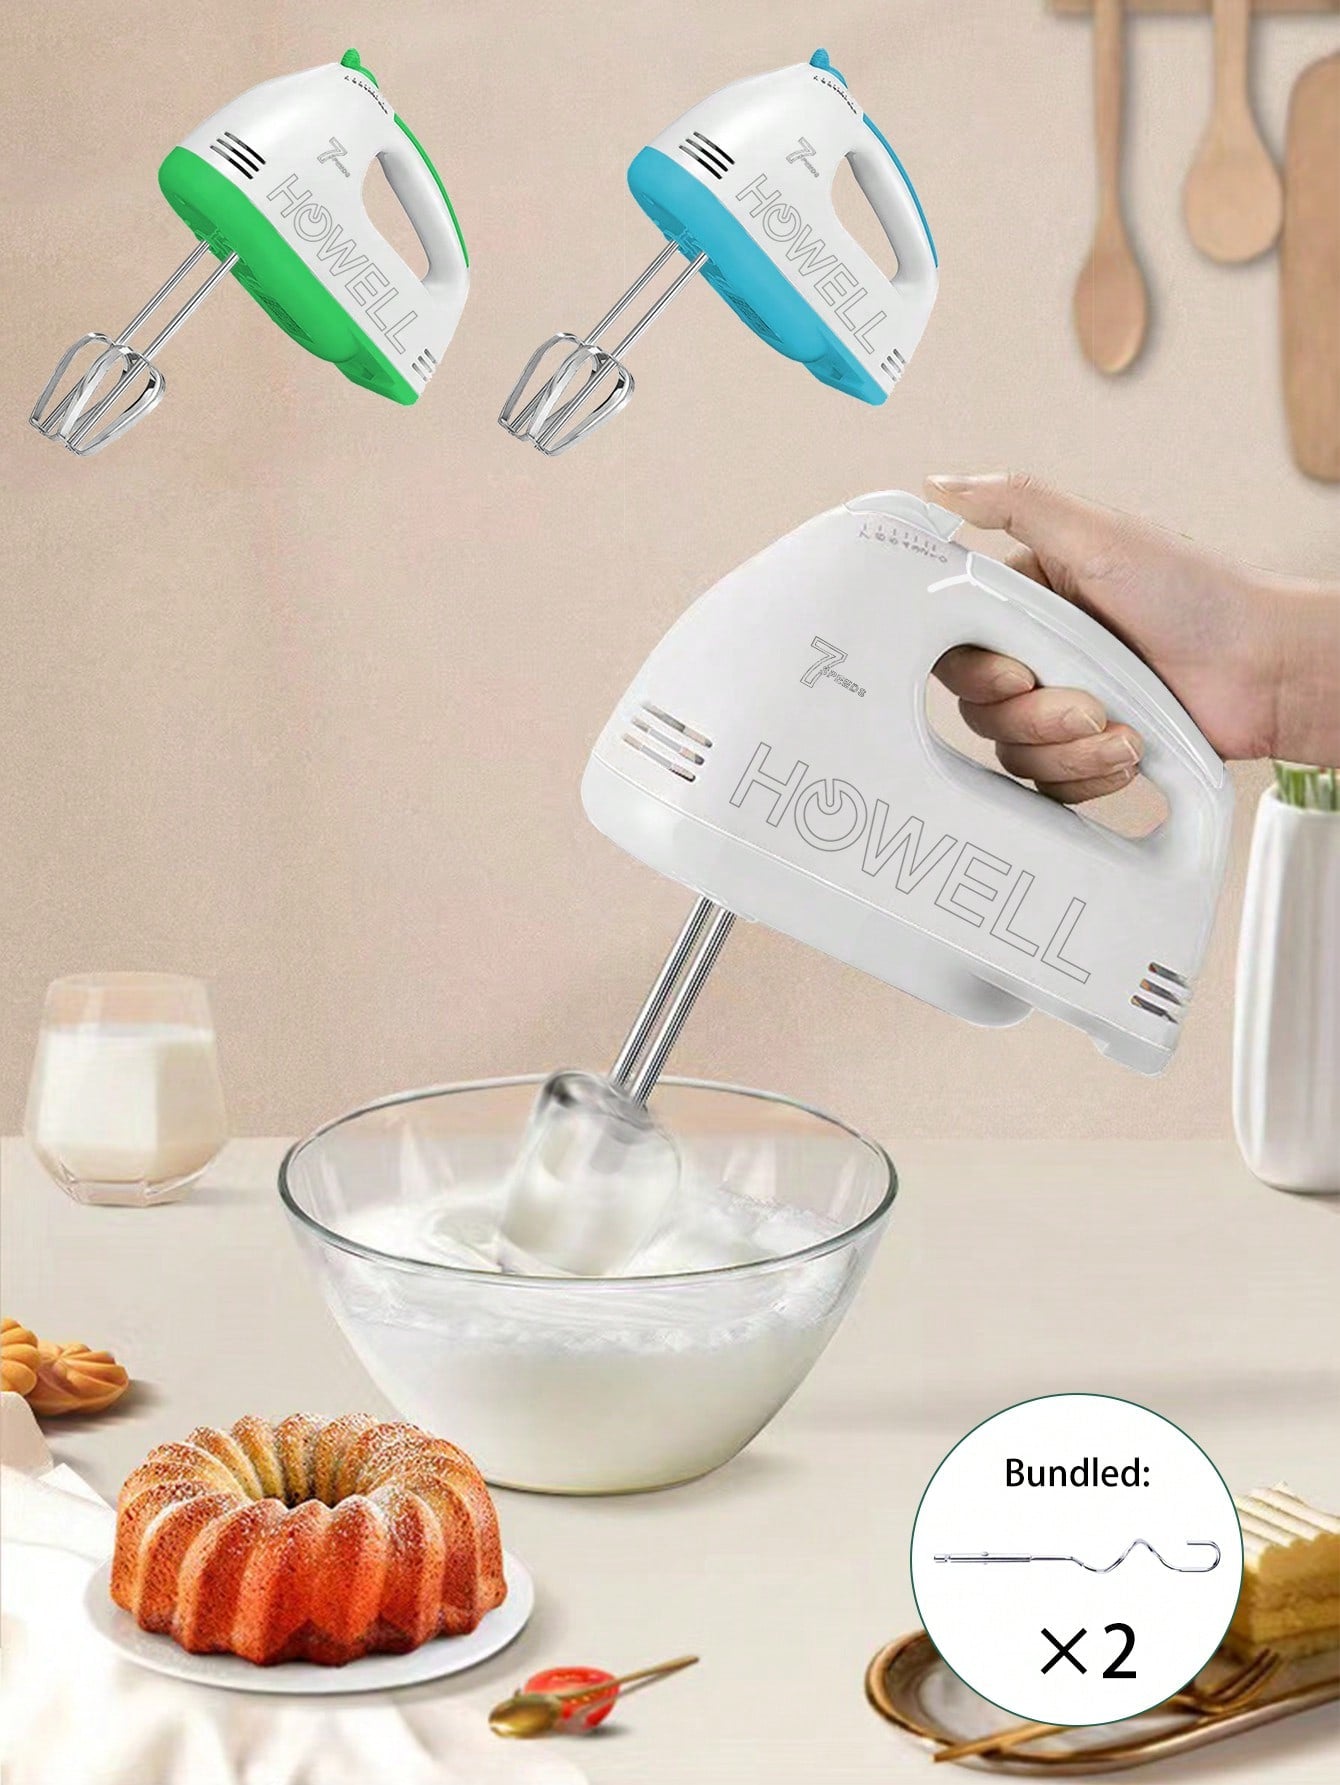 1pc 7-speed Powerful Handheld Mixer With Interchangeable Attachments For Egg Beater And Dough Kneader, Including 2 Dough Hooks-Green-1